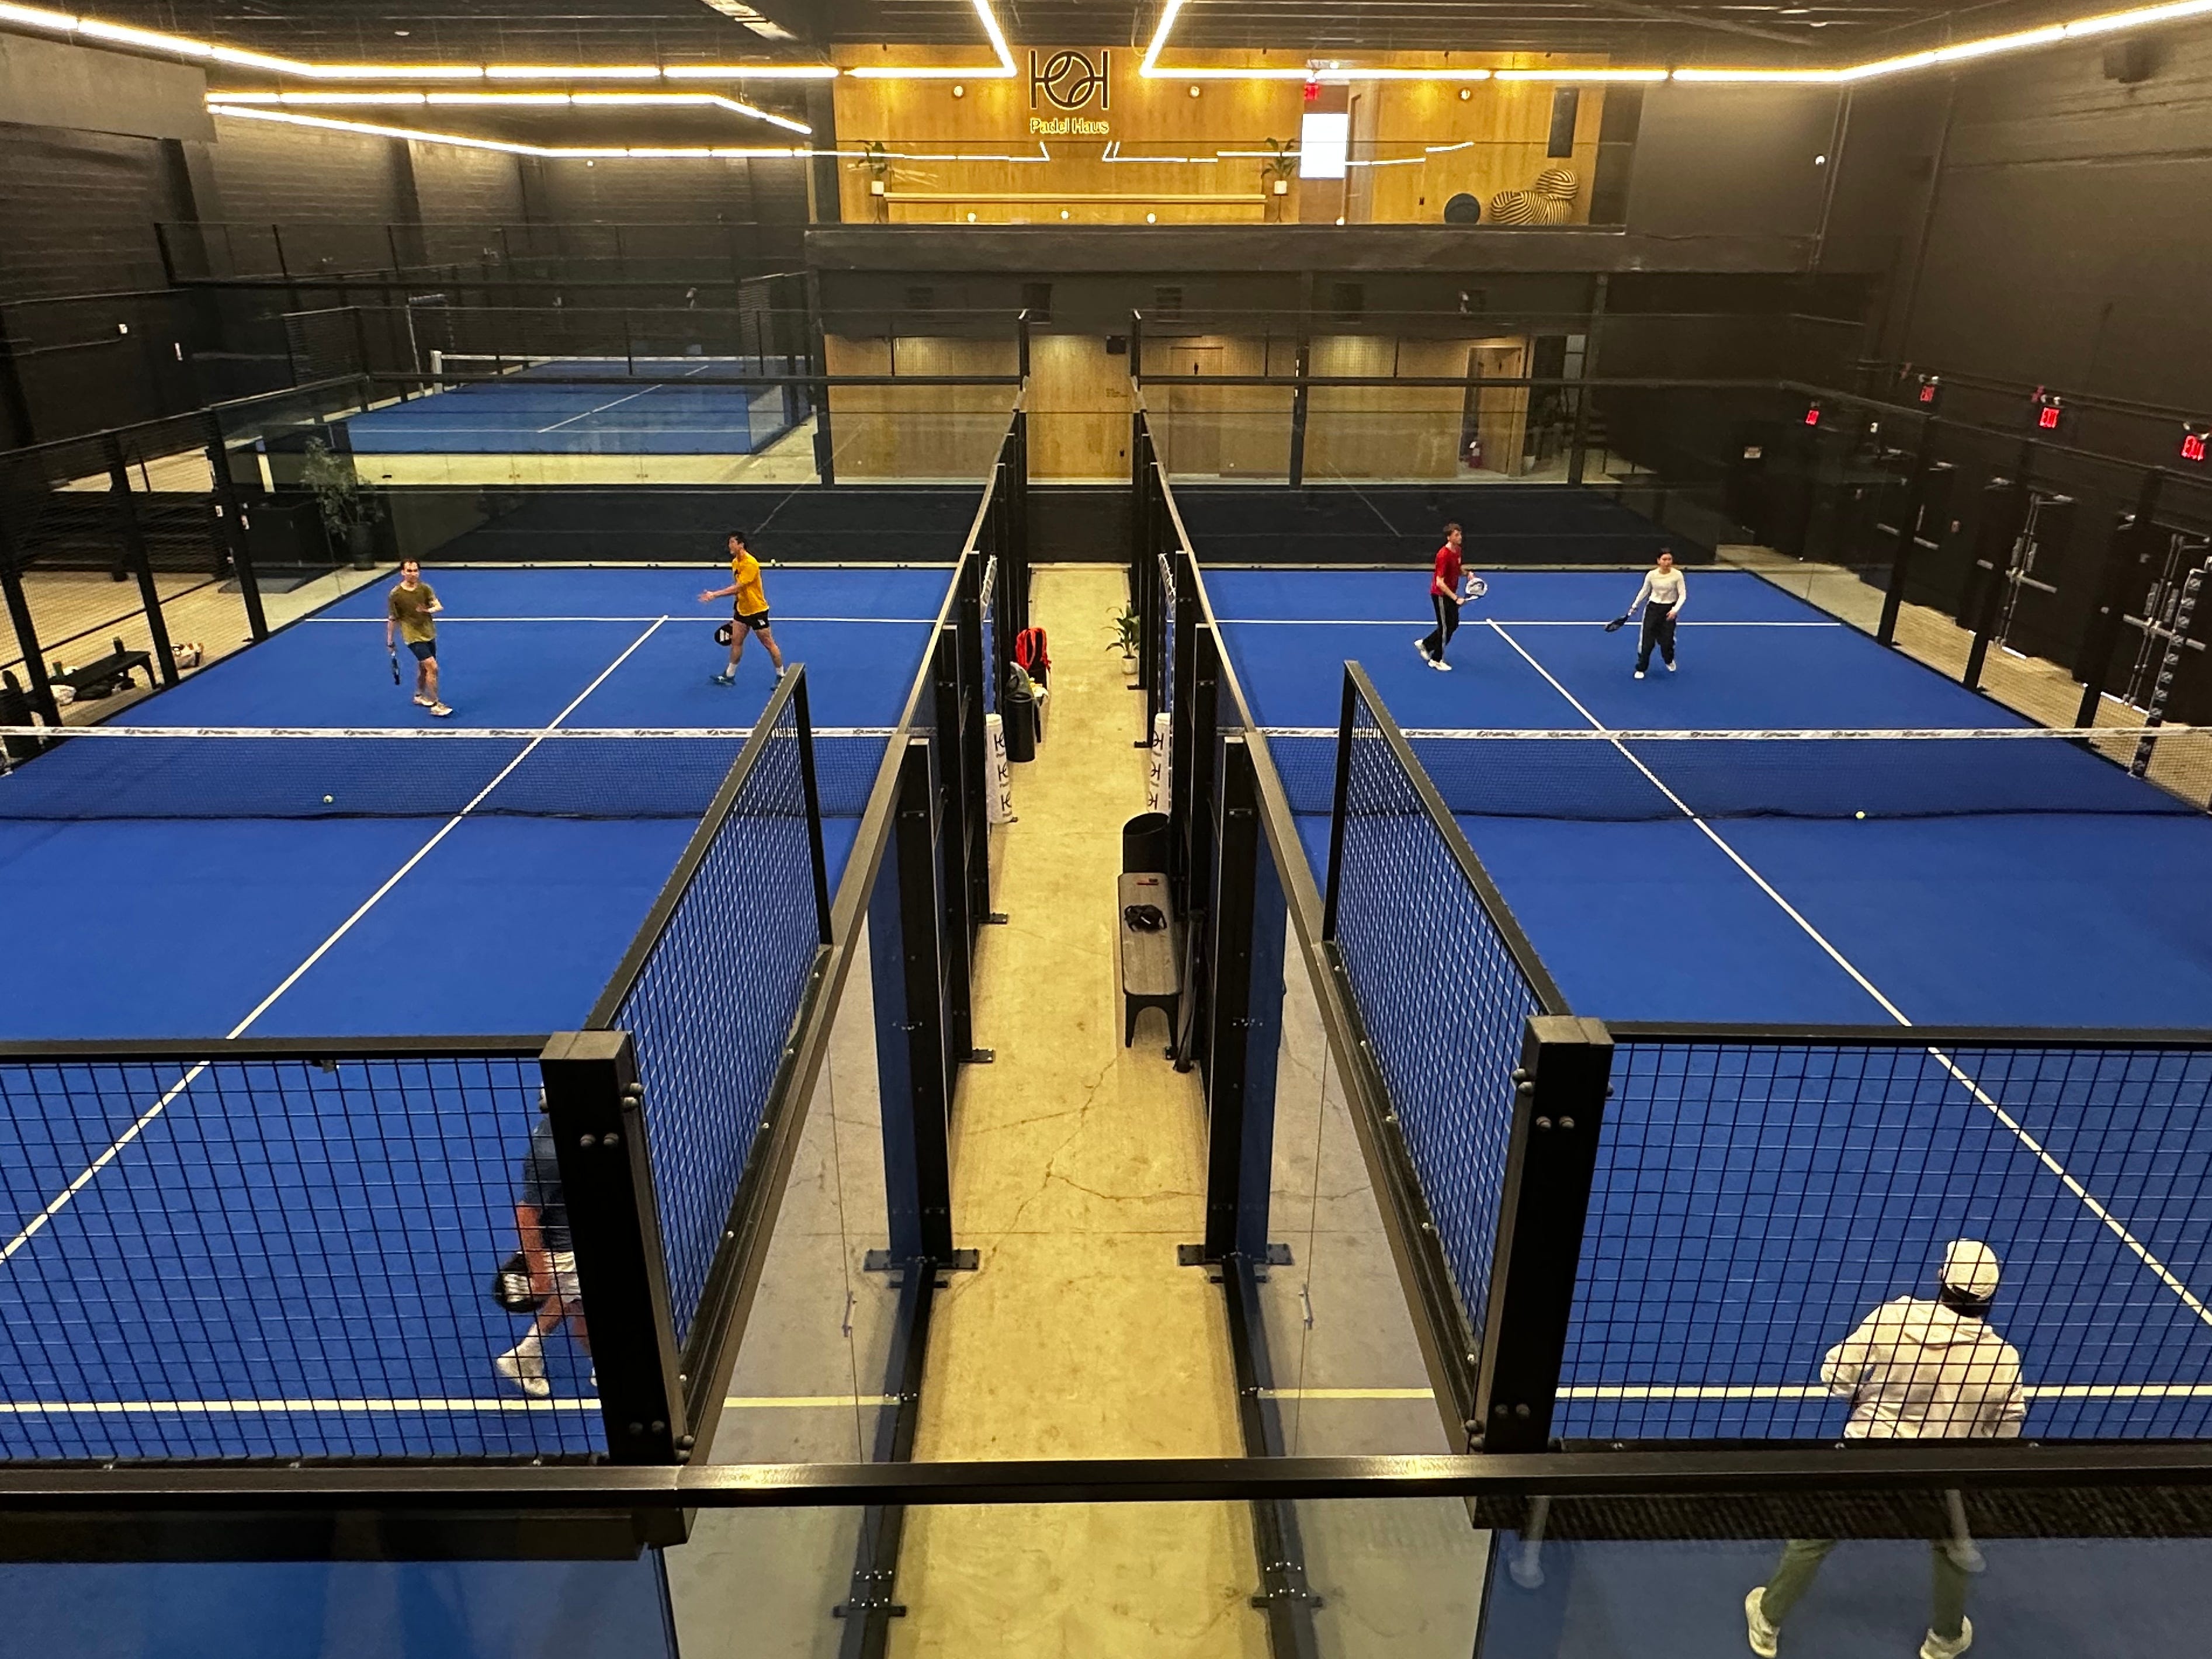 <p>Padel has the chattiness of pickleball and the intensity of tennis. In fact, the court is essentially a smaller tennis court.</p><p>The main thing that sets it apart from other racket sports is the glass casing required to play. During a game, players can hit the ball after it bounces off a glass wall.</p><p>That makes it hard for your local park to erect padel courts. Still, it's less of a stretch for the wealthy, who can install glass walls and artificial turf on their sprawling estates — or pay for pricey memberships to exclusive clubs (a single-club membership at Padel Haus, including an initiation fee, costs upwards of $2,000 a year, for example.)</p>